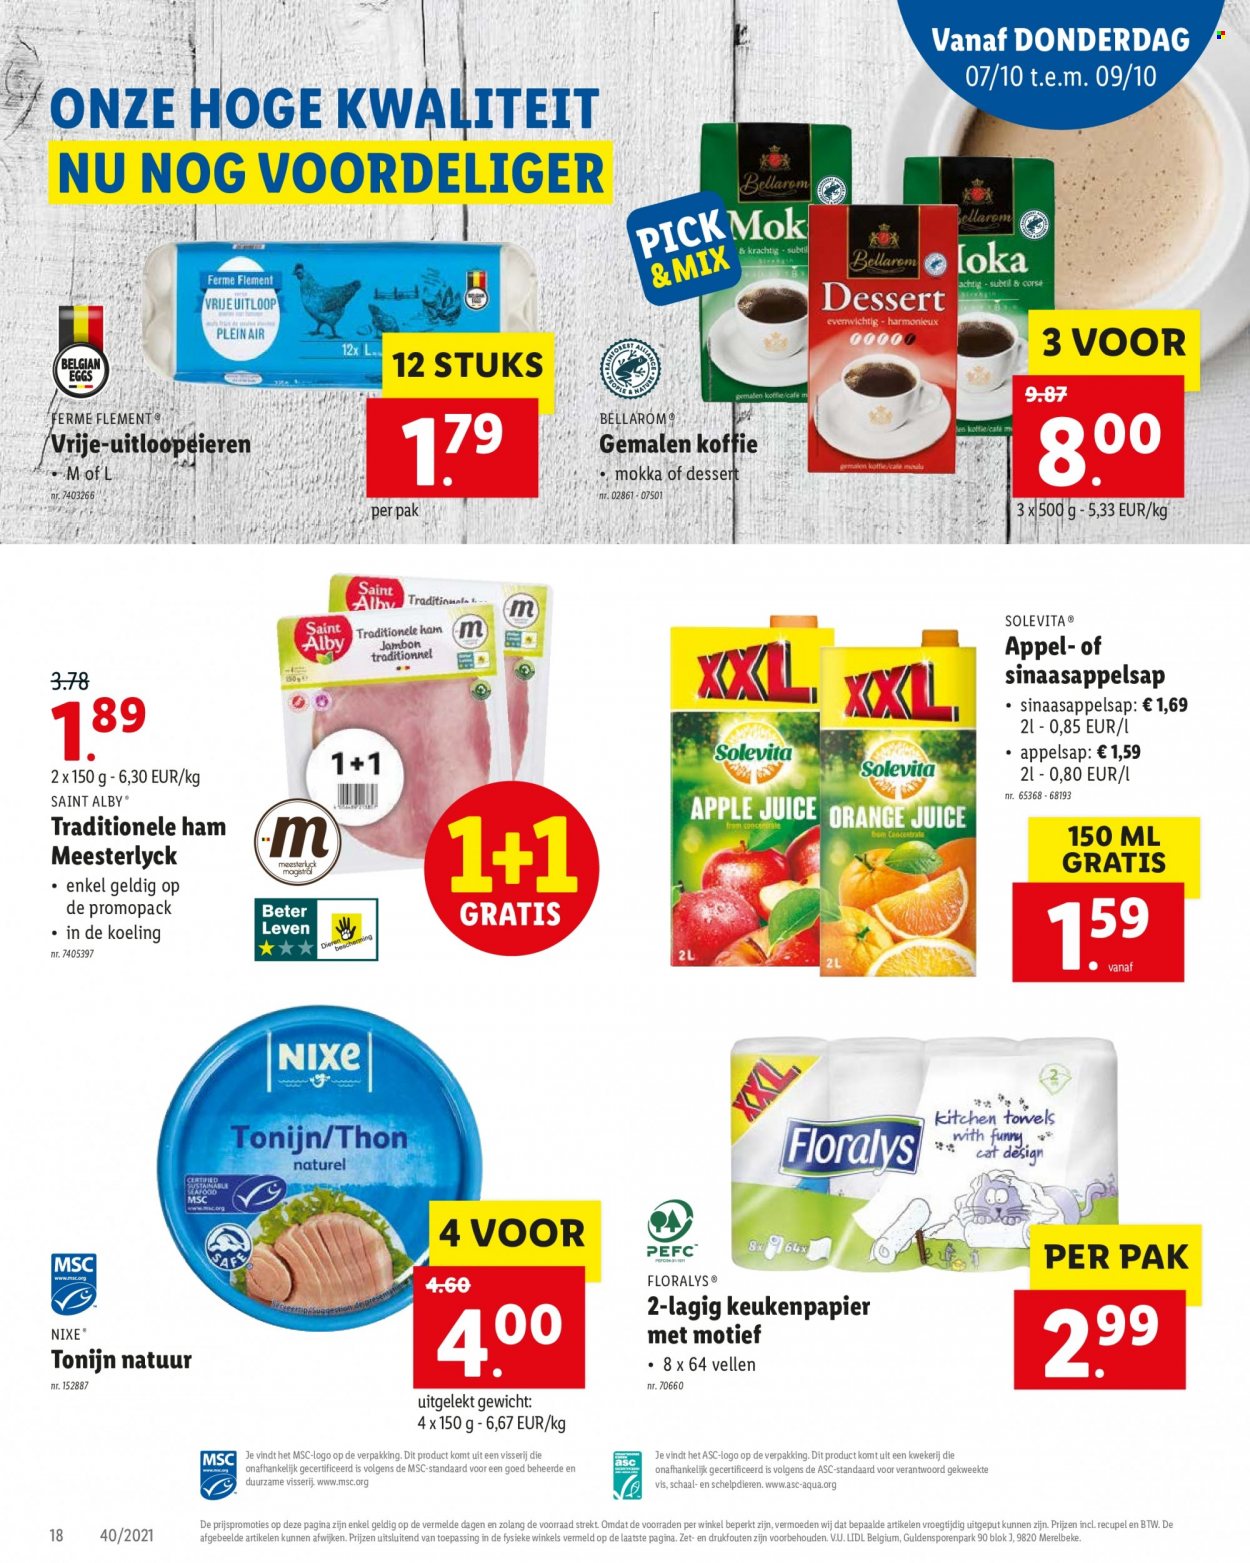 Catalogue Lidl - 4.10.2021 - 9.10.2021. Page 18.